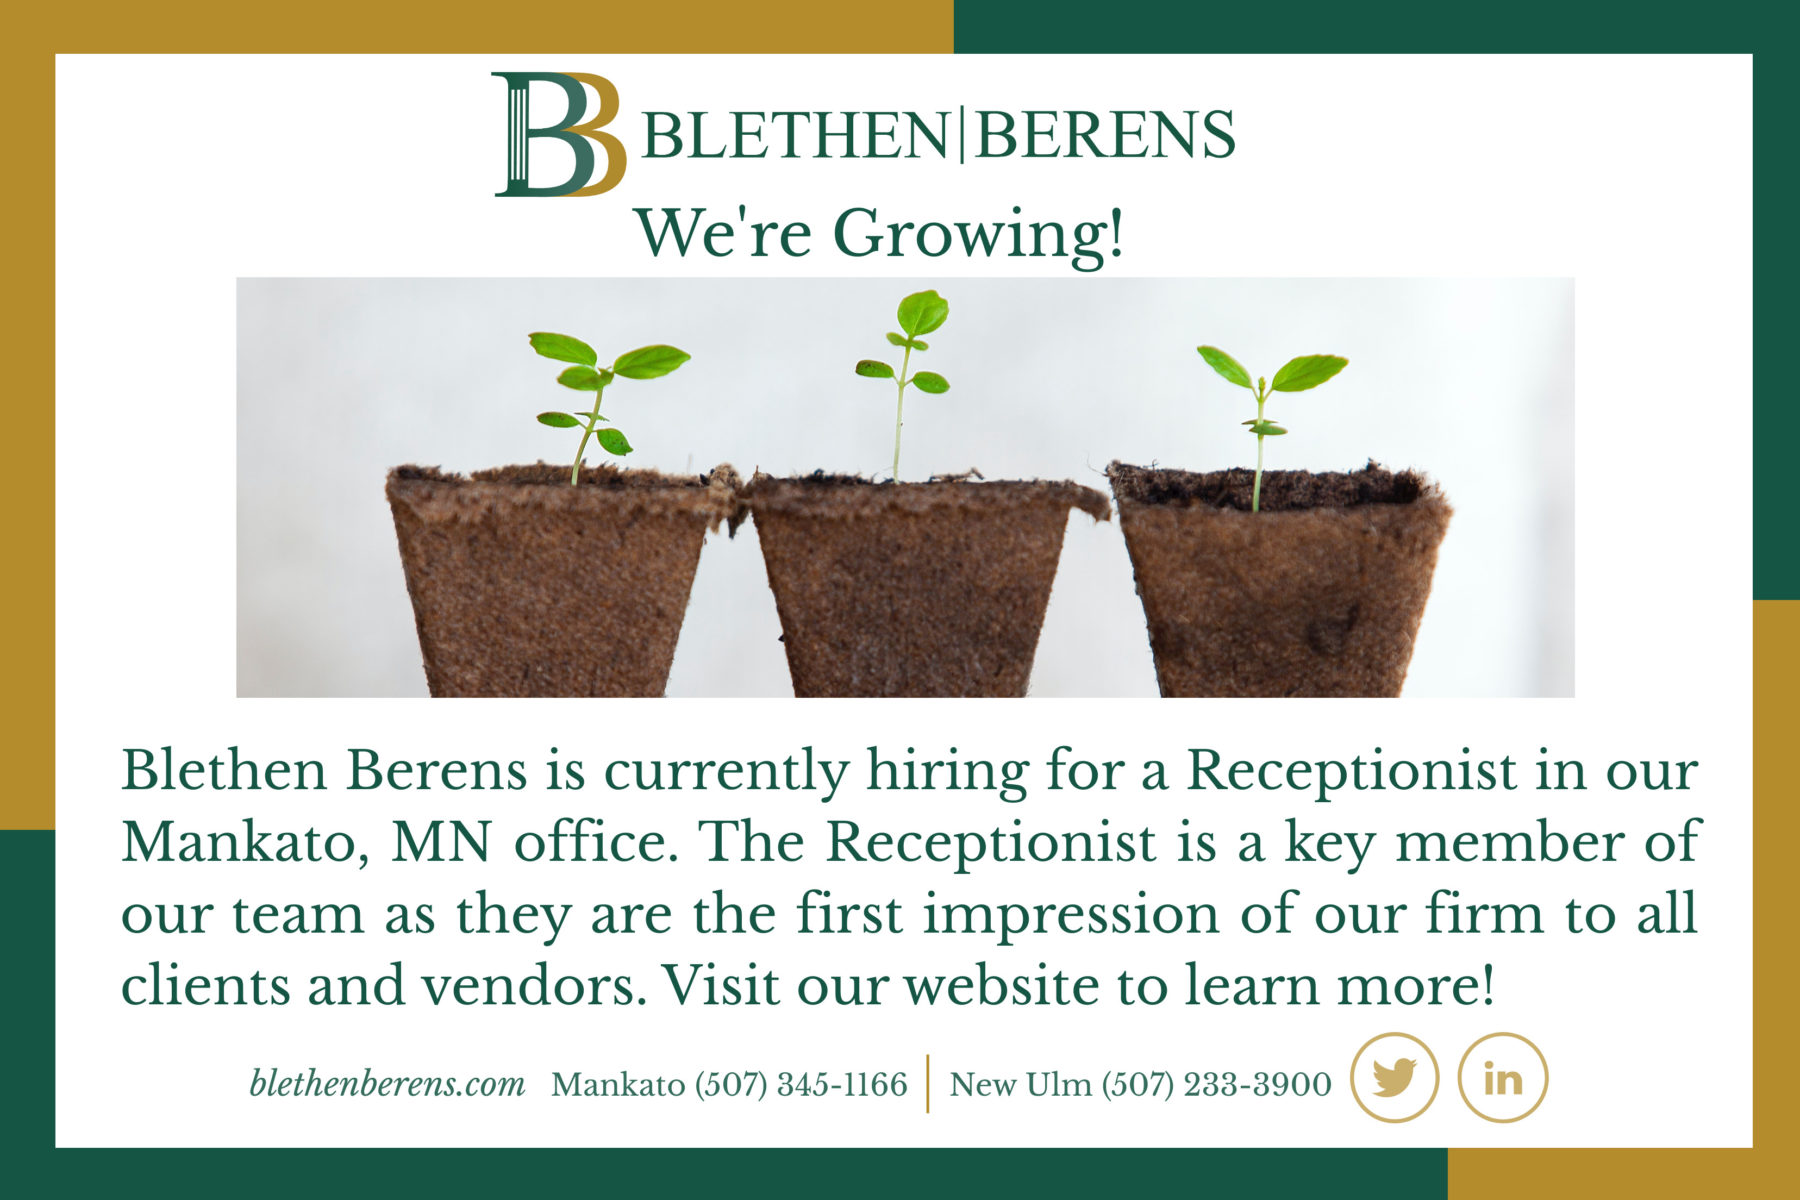 Blethen Berens: We're Growing! Blethen Berens is currently hiring for a Receptionist in our Mankato, MN office. The Receptionist is a key member of our team as they are the first impression of our firm to all clients and vendors.